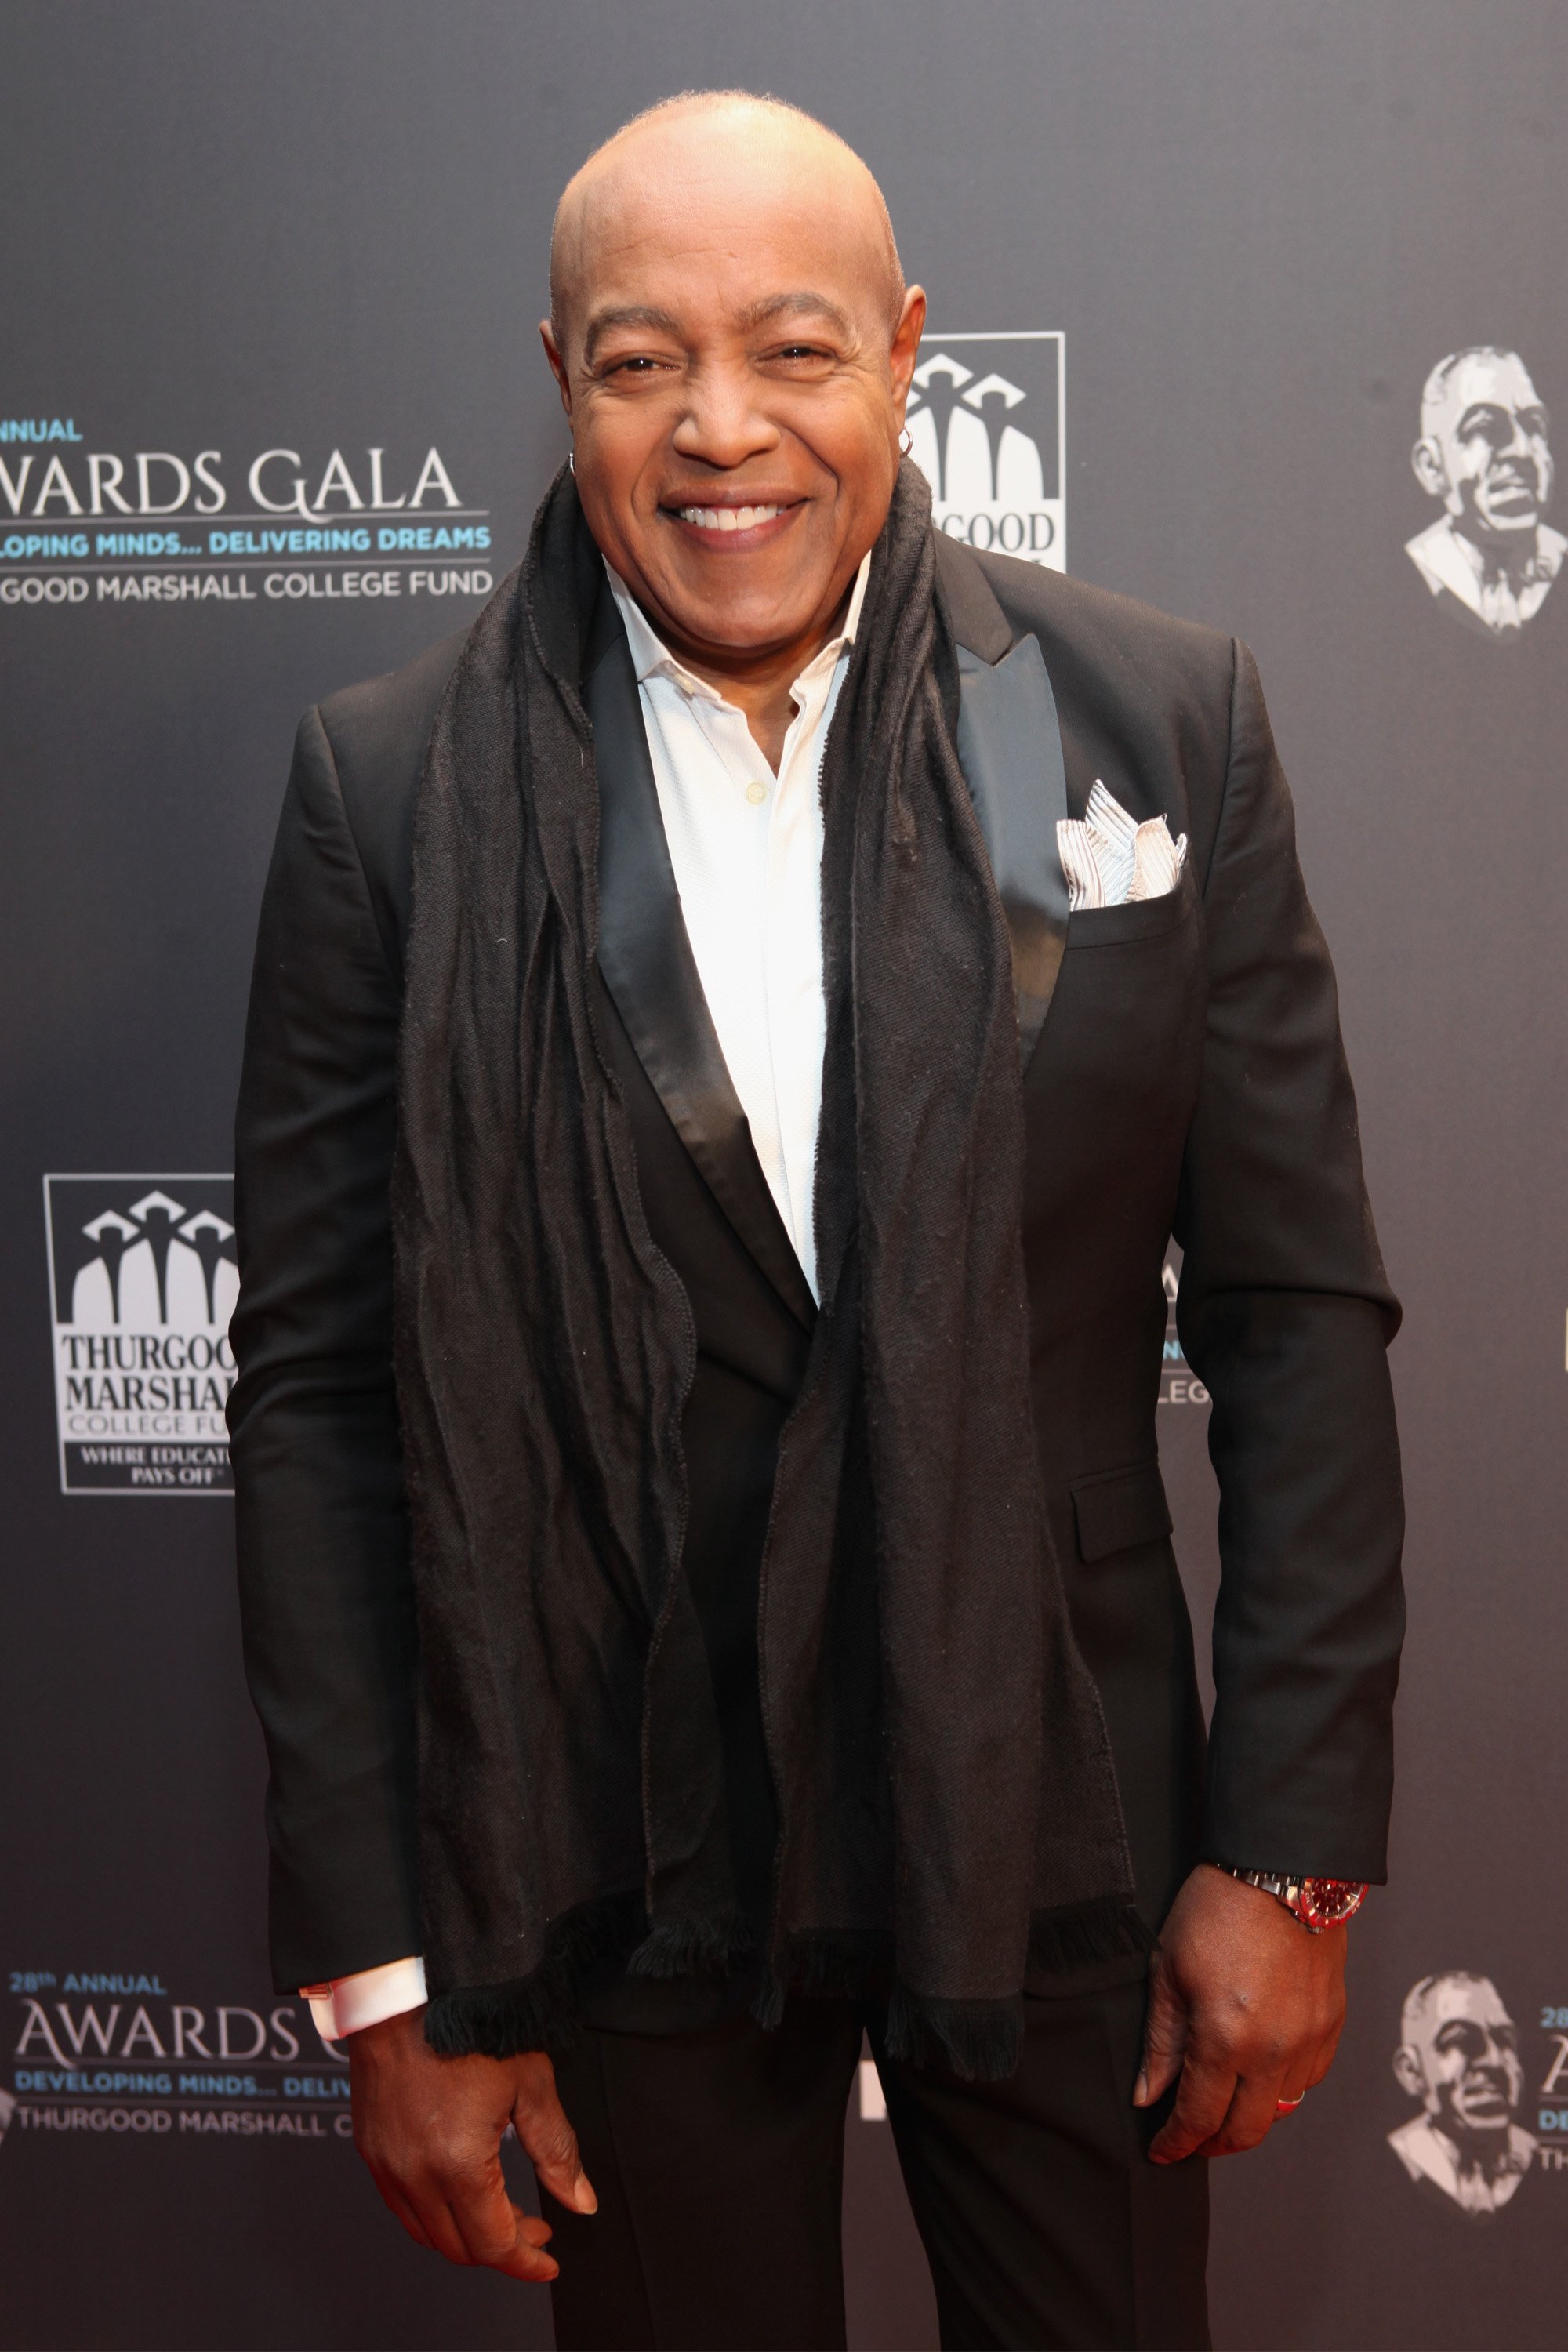 Peabo Bryson at the Thurgood Marshall College Fund 28th Annual Awards Gala on Nov. 21, 2016 in Washington, DC. | Photo: Getty Images